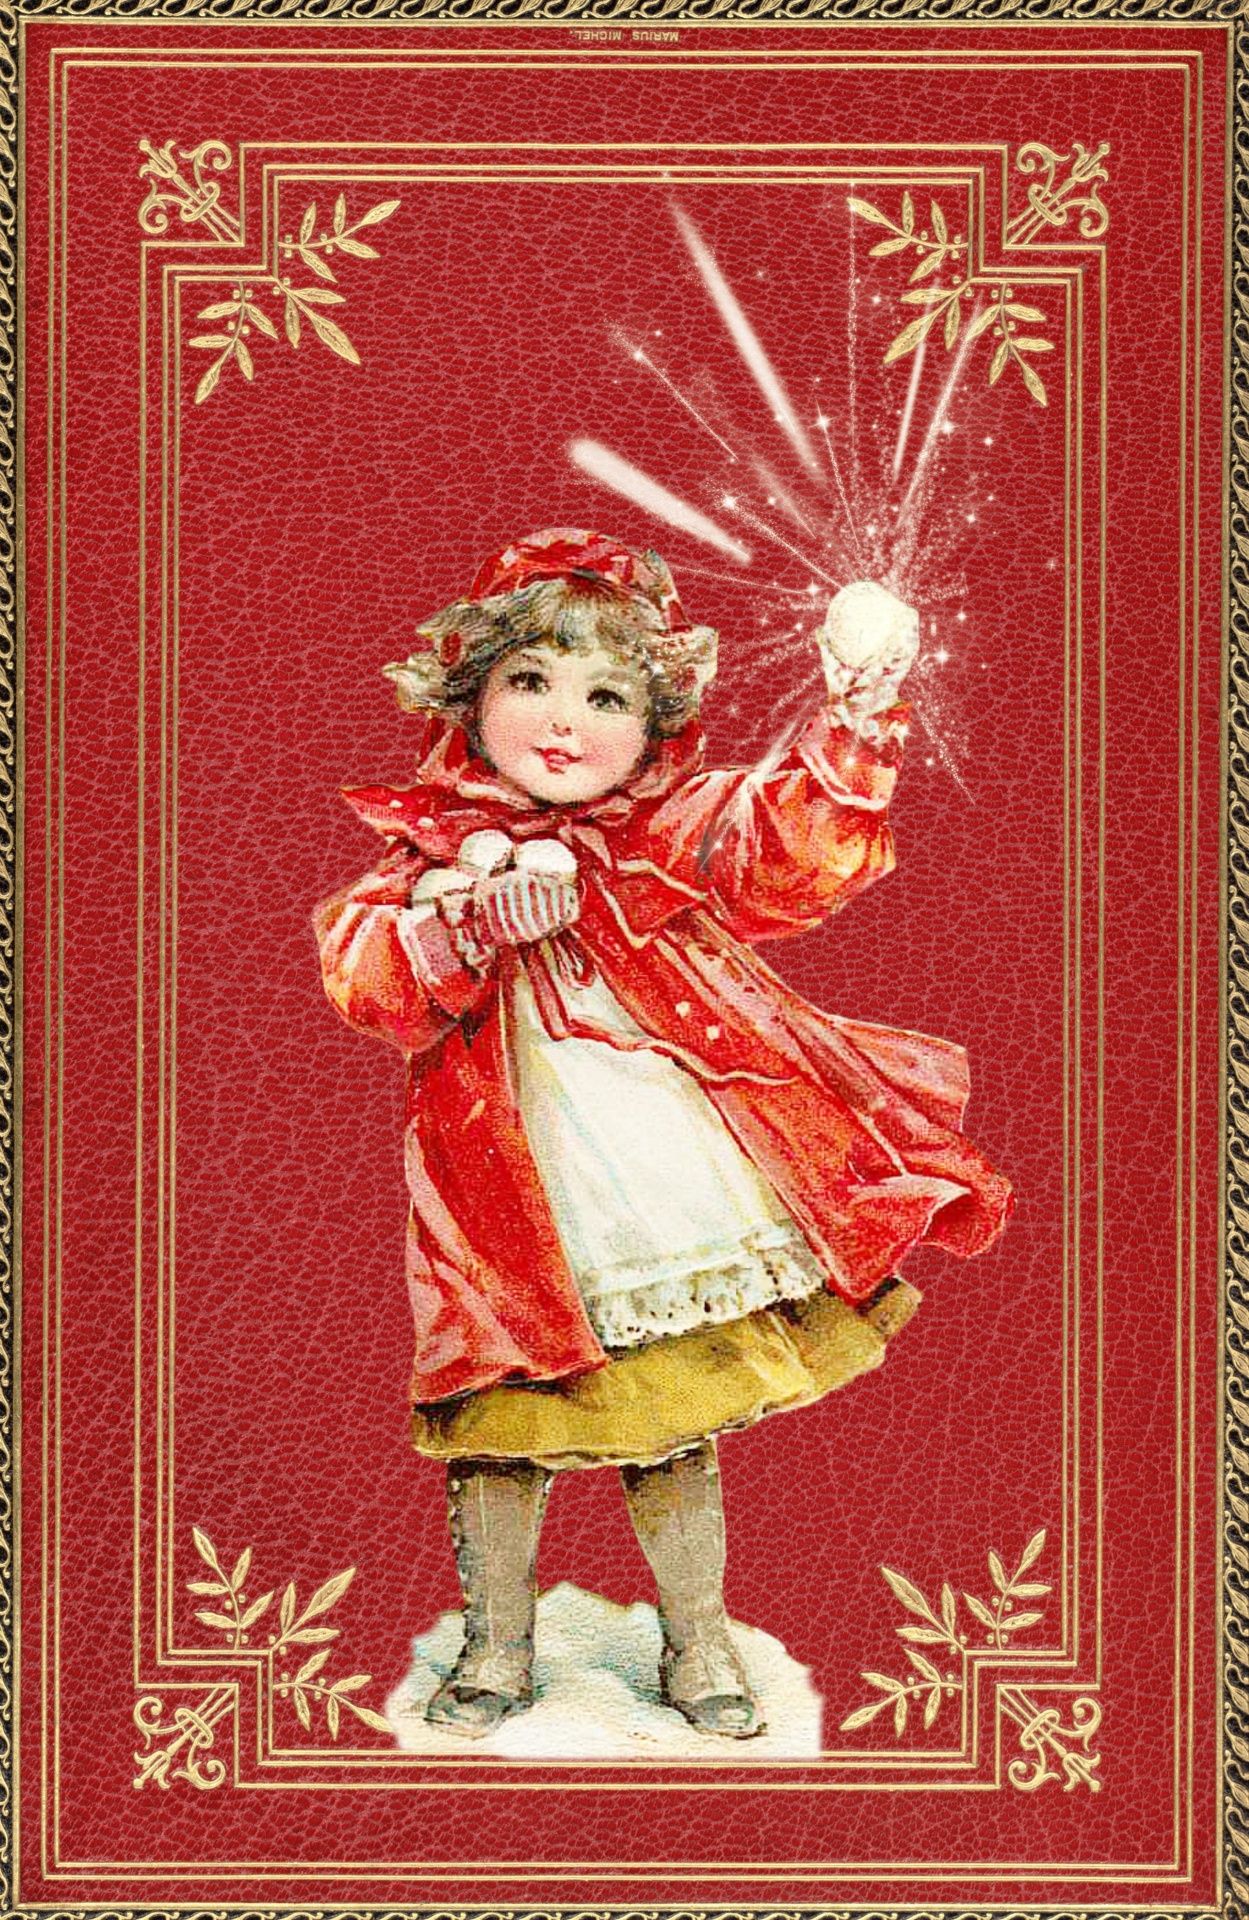 vintage illustration of a little girl with an arm full of snowballs